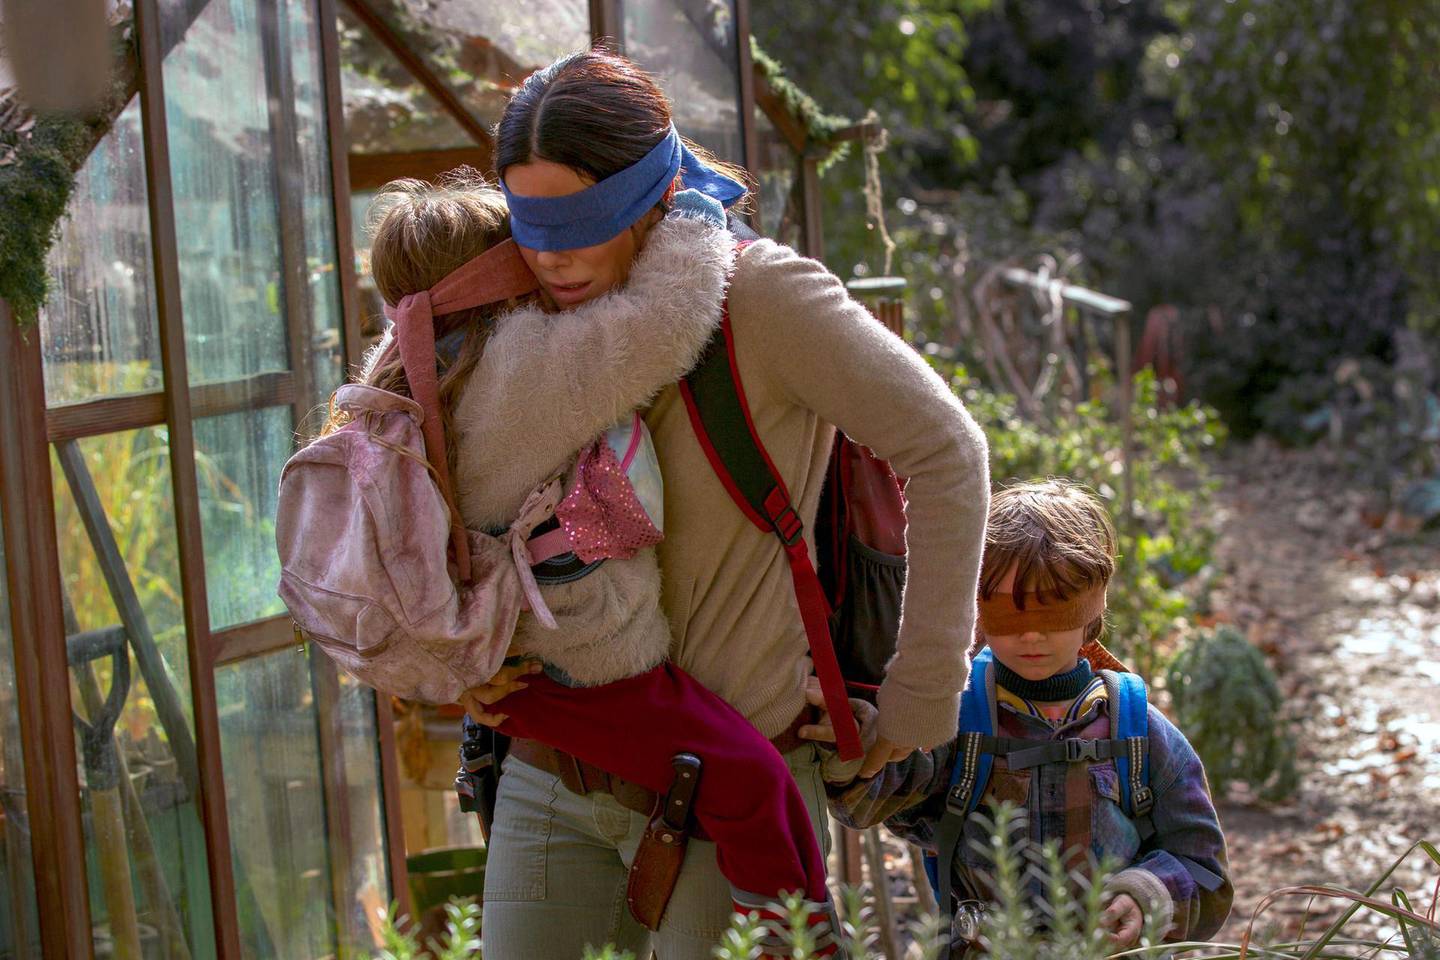 This image released by Netflix shows Sandra Bullock in a scene from the film, "Bird Box." Netflixâ€™s post-apocalyptic survival film is drawing criticism for using footage of a real fiery train disaster but the streaming giant has no plans to remove it. The footage concerns a 2013 tragedy in the Quebec town of Lac-Megantic when an unattended train carrying crude oil rolled down an incline, came off the tracks and exploded into a massive ball of fire, killing 47 people. (Saeed Adyani/Netflix via AP)